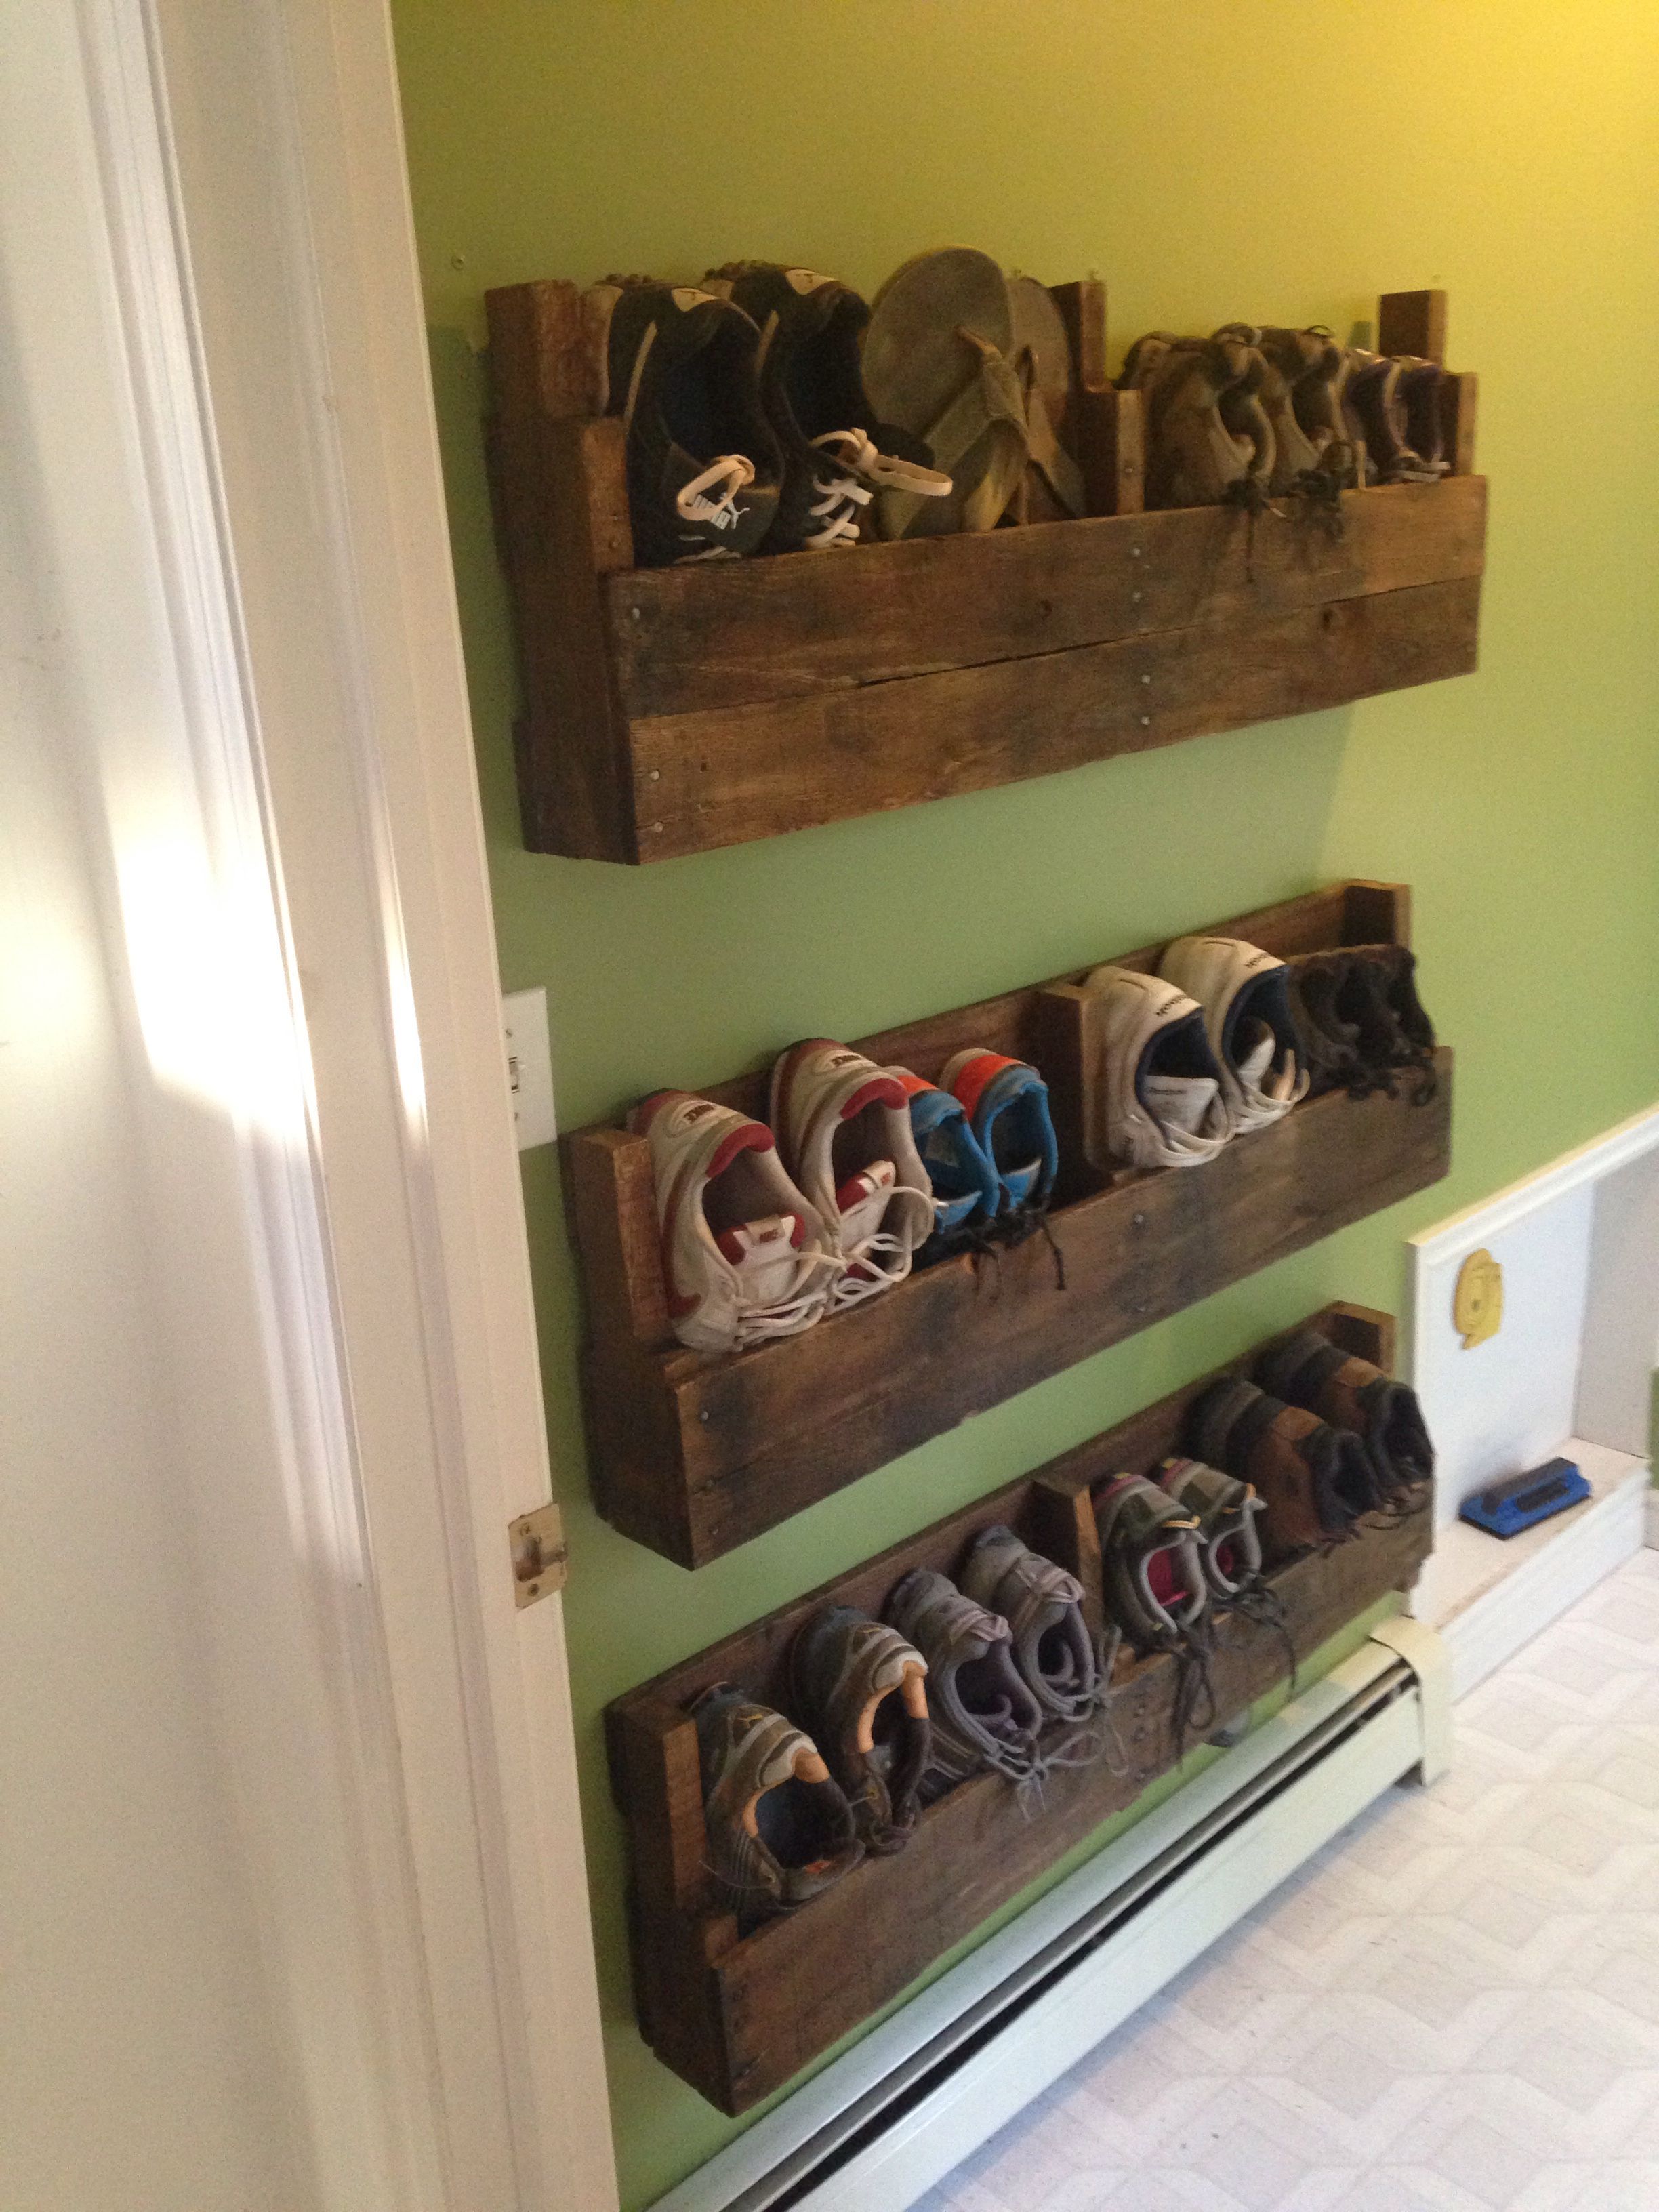 Dyi shoe rack made out of pallets! Project I have been trying to finish to clean u